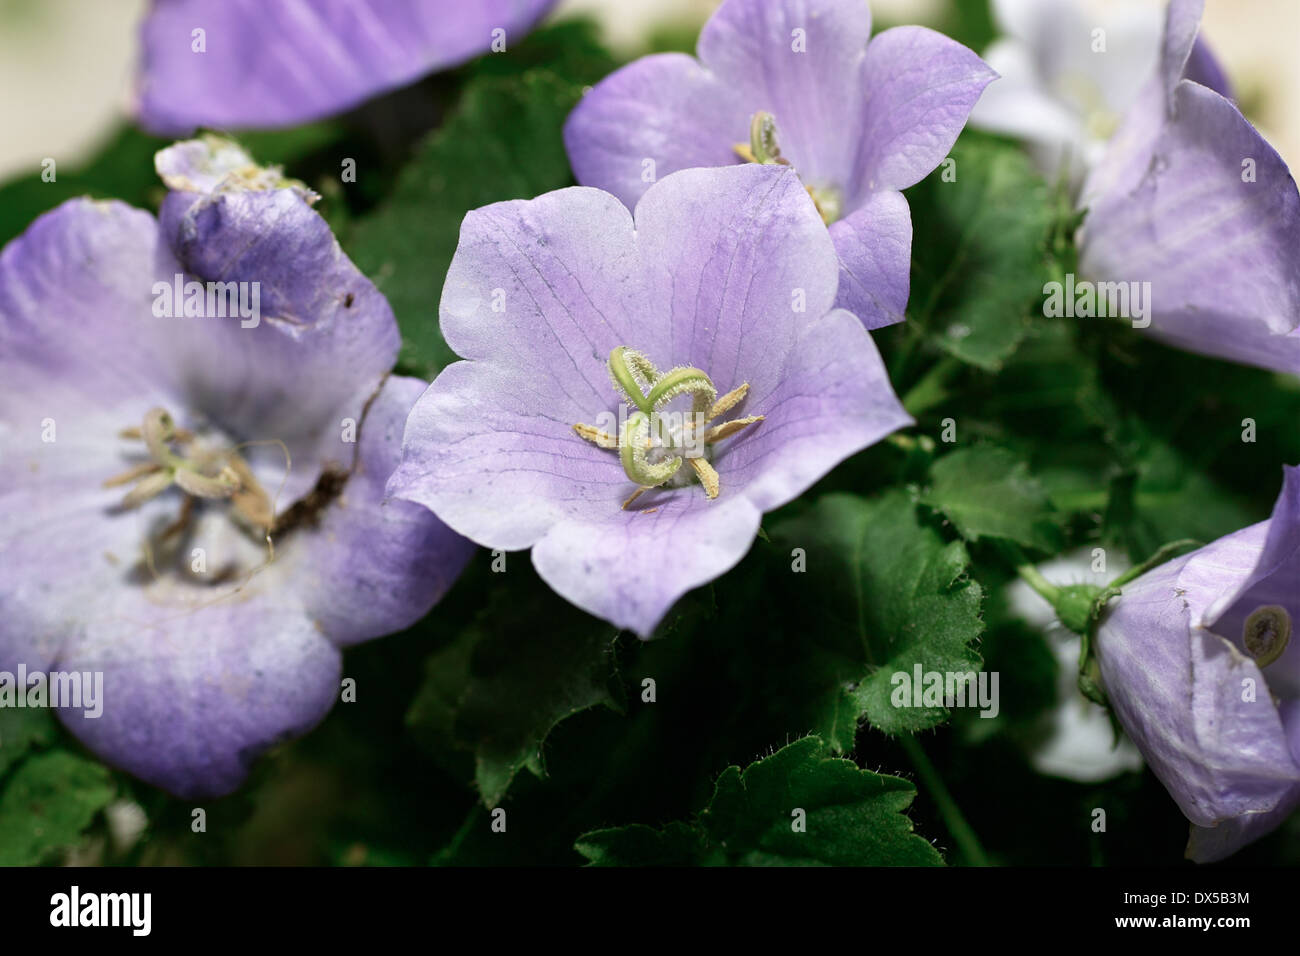 Campanula carpatica, Carpathian harebell, flower plant in the family Campanulaceae. Stock Photo